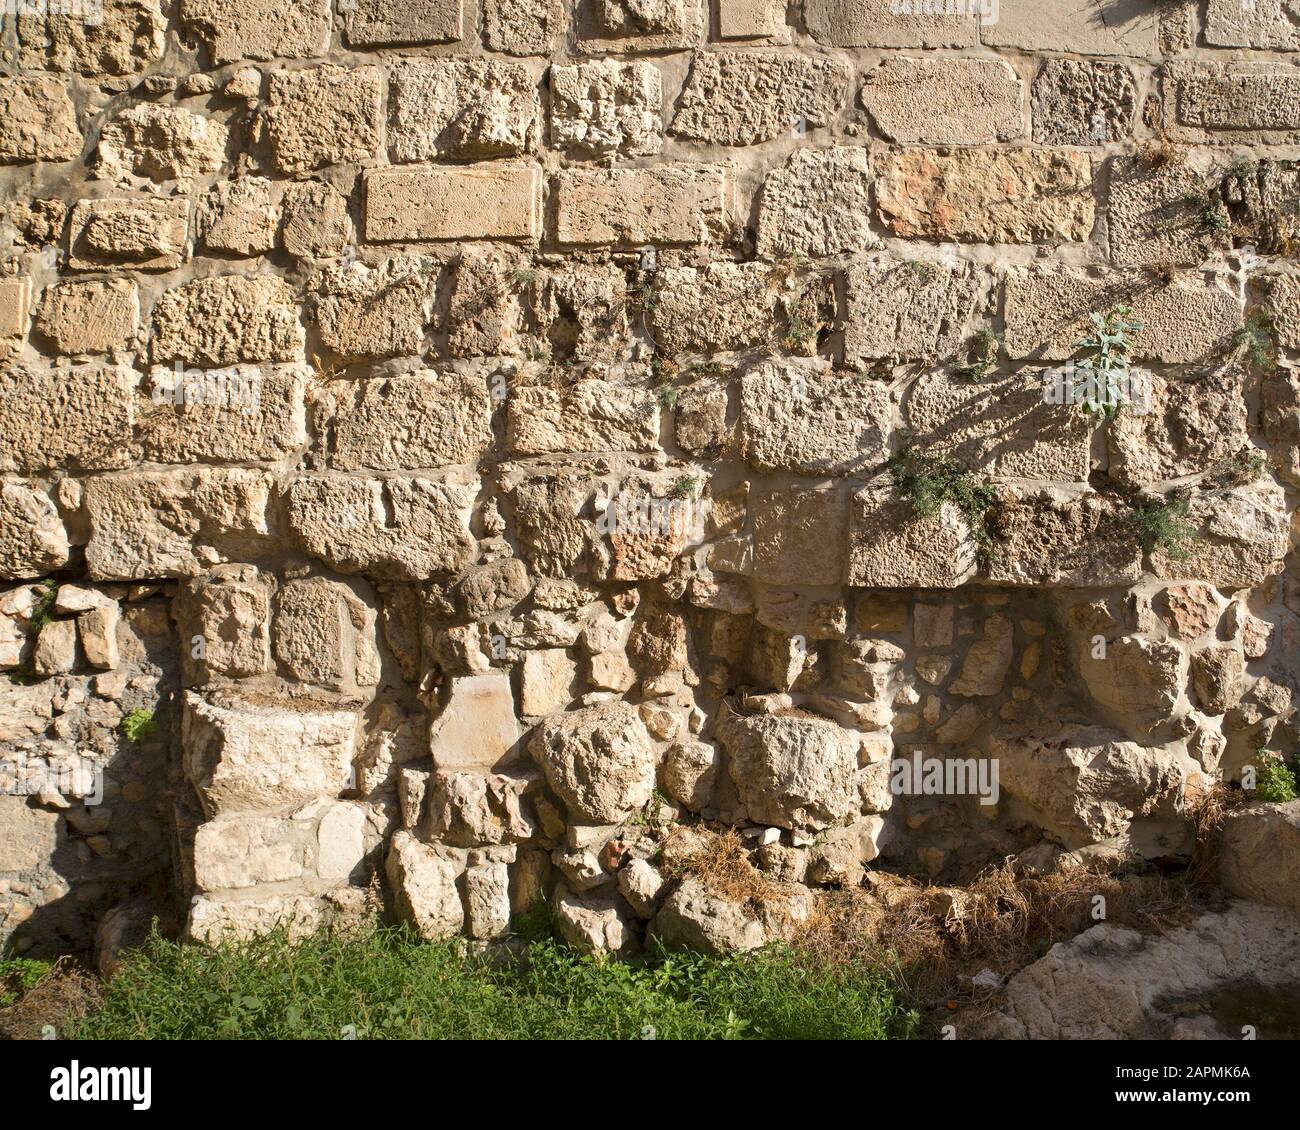 Section of Jerusalem old city wall from the Byzantine period (6th century CE) Stock Photo